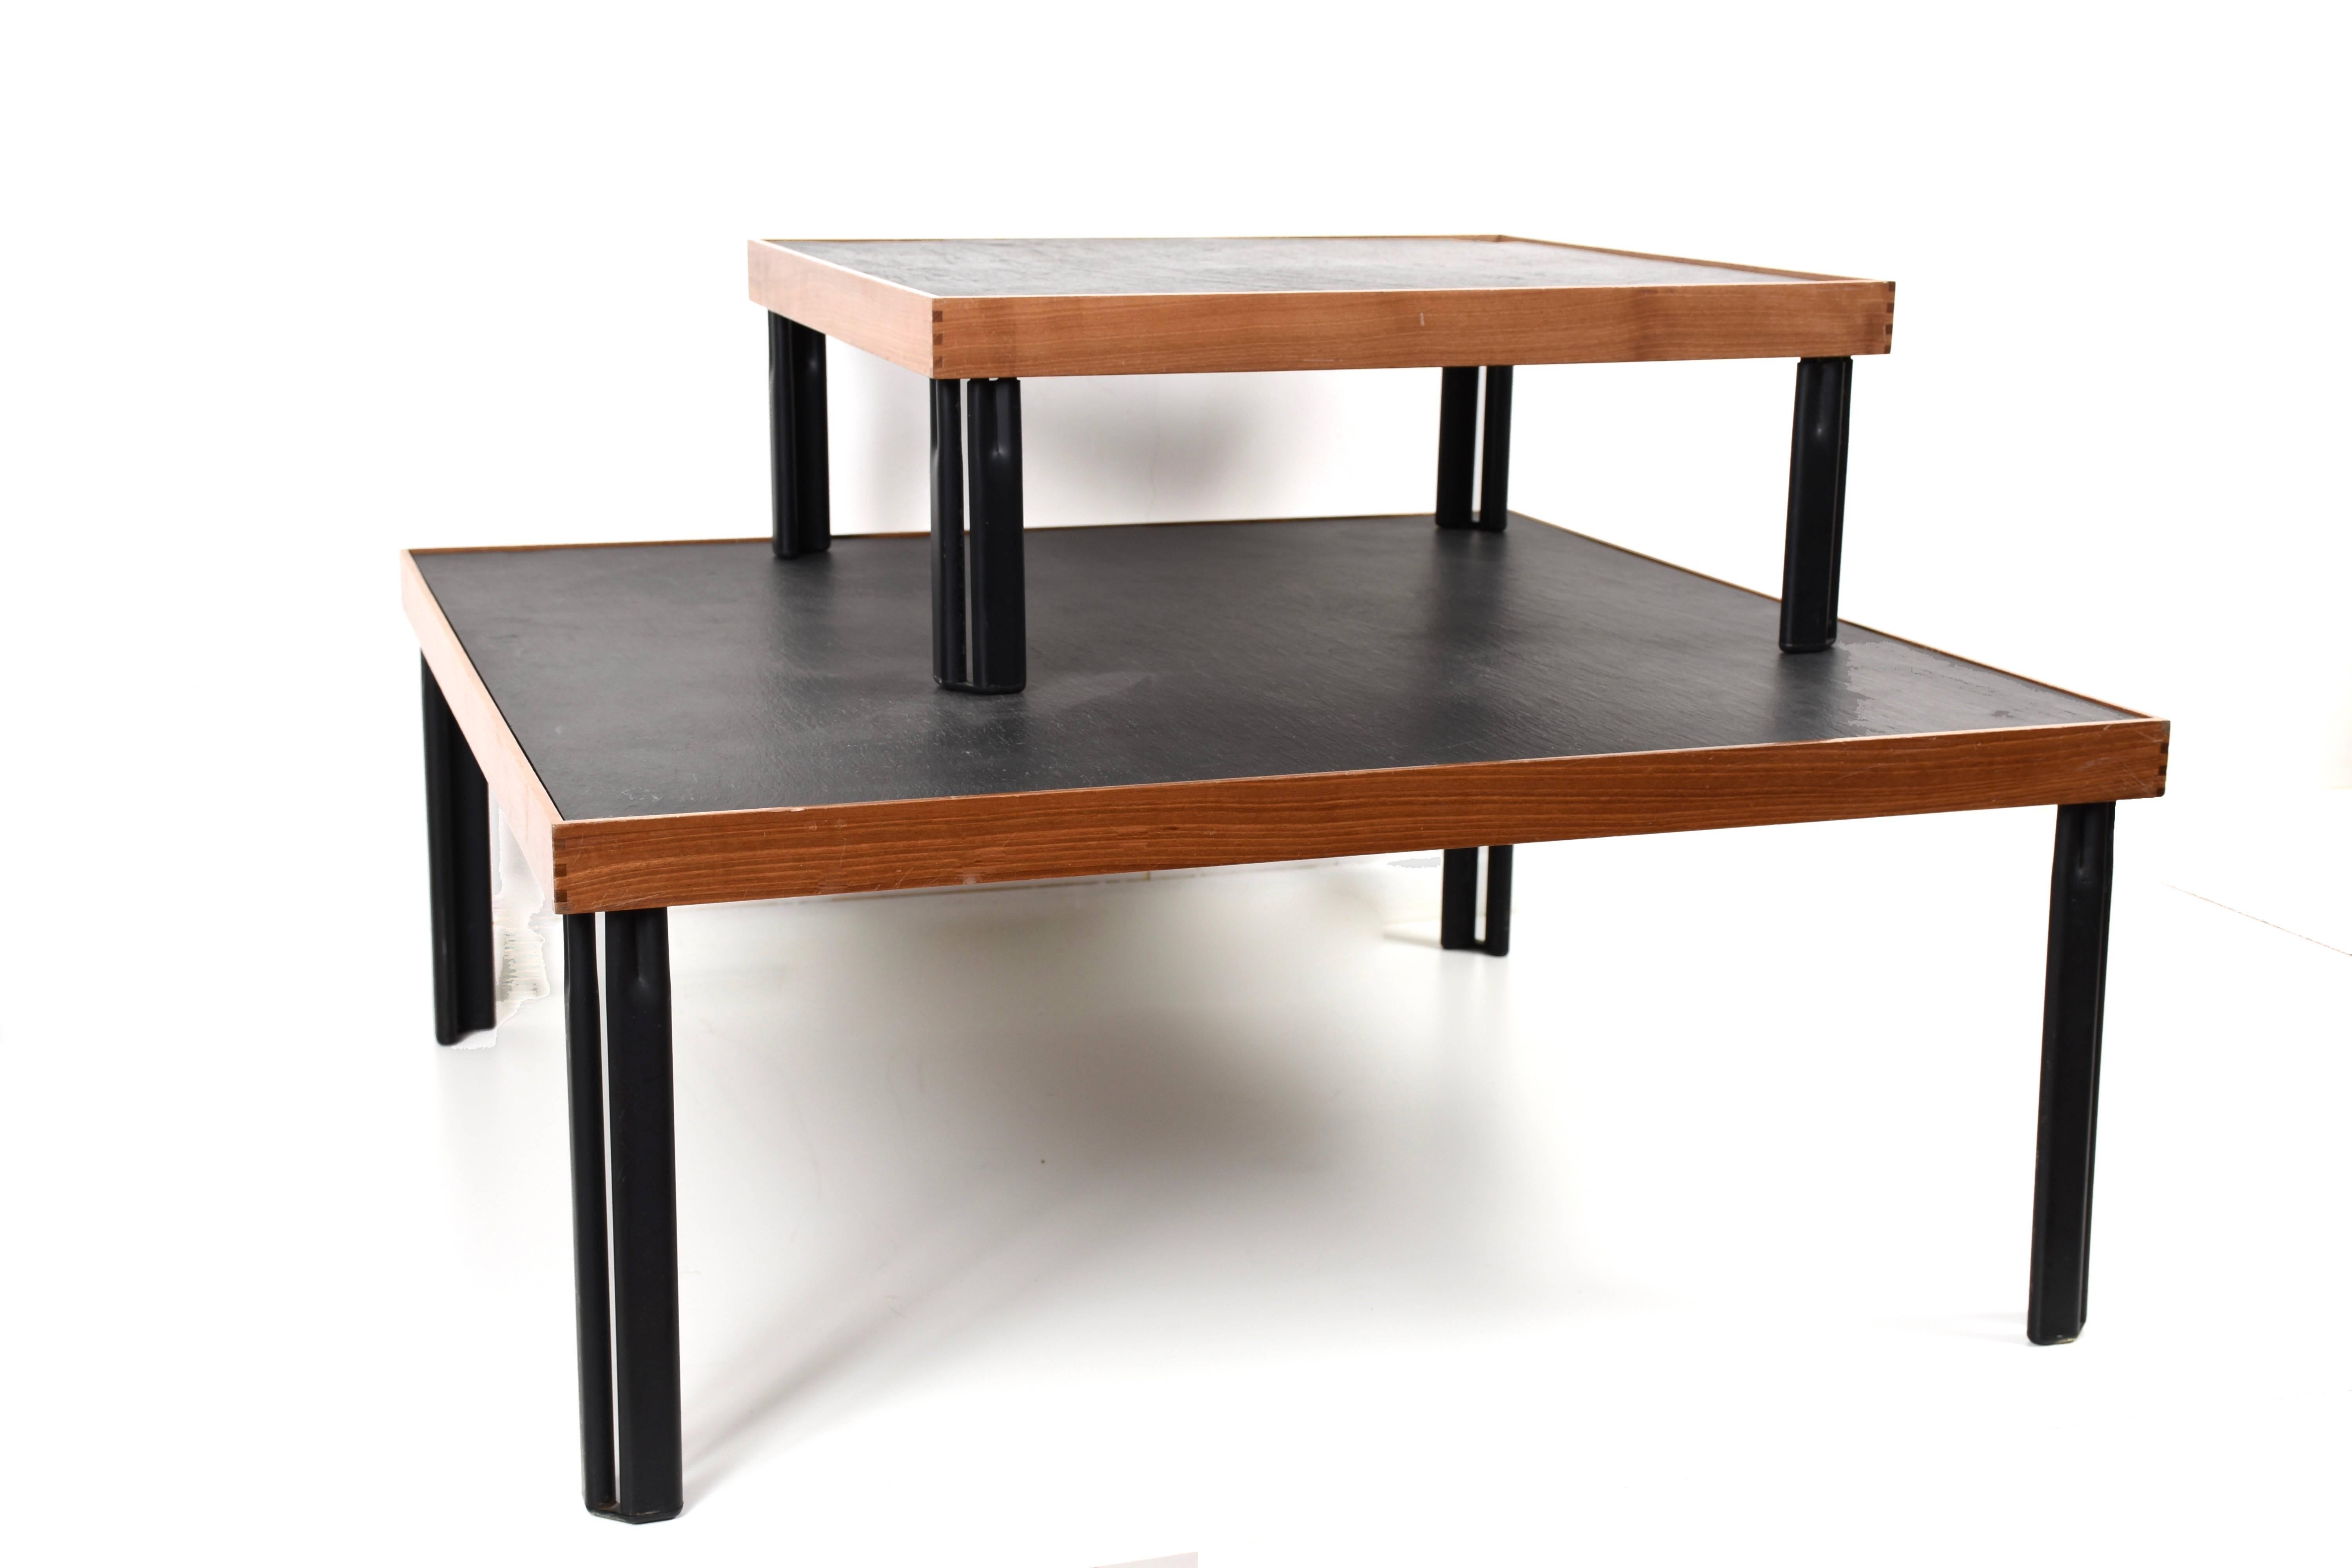 Naviglio. Designed by Piero De Martini for Cassina, Italy, 1980s.

Walnut, slate and lacquered metal.
Large table measures: 85 x 85 x cm 35 H
Small table measures: 57 x 57 x cm 22 H.